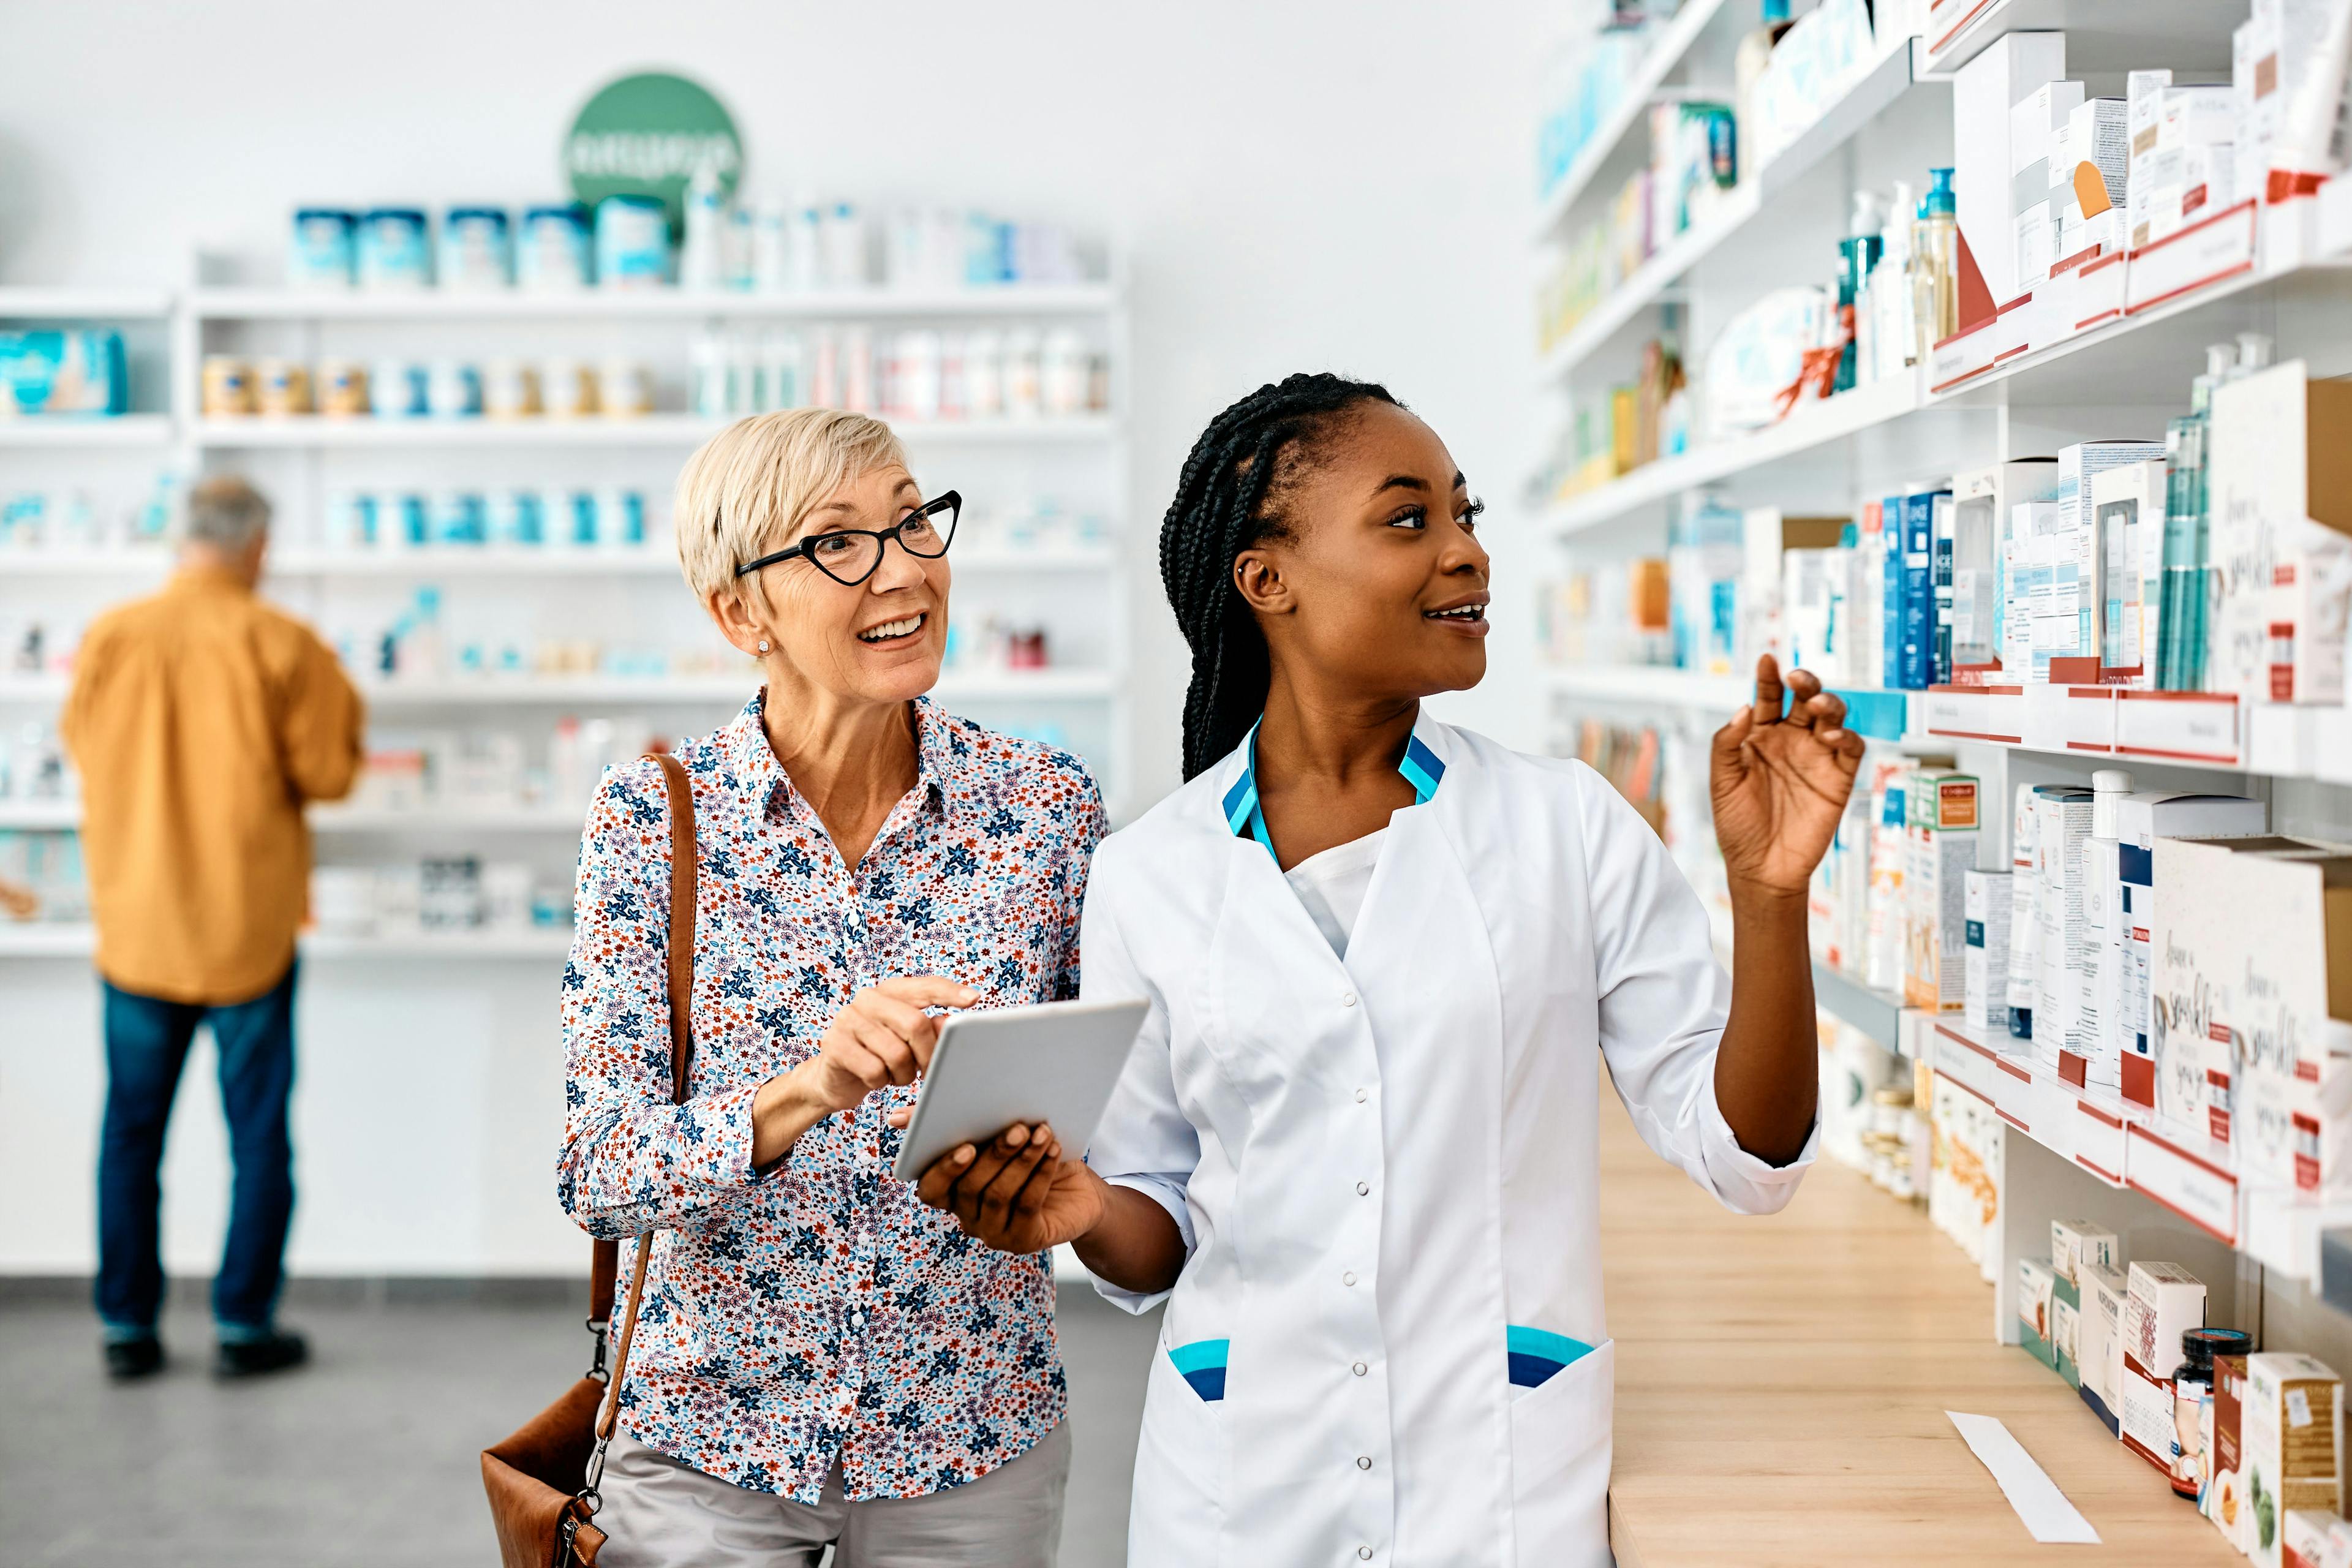 Young black pharmacist assists senior woman in buying medicine in pharmacy. | Image Credit: Drazen - stock.adobe.com